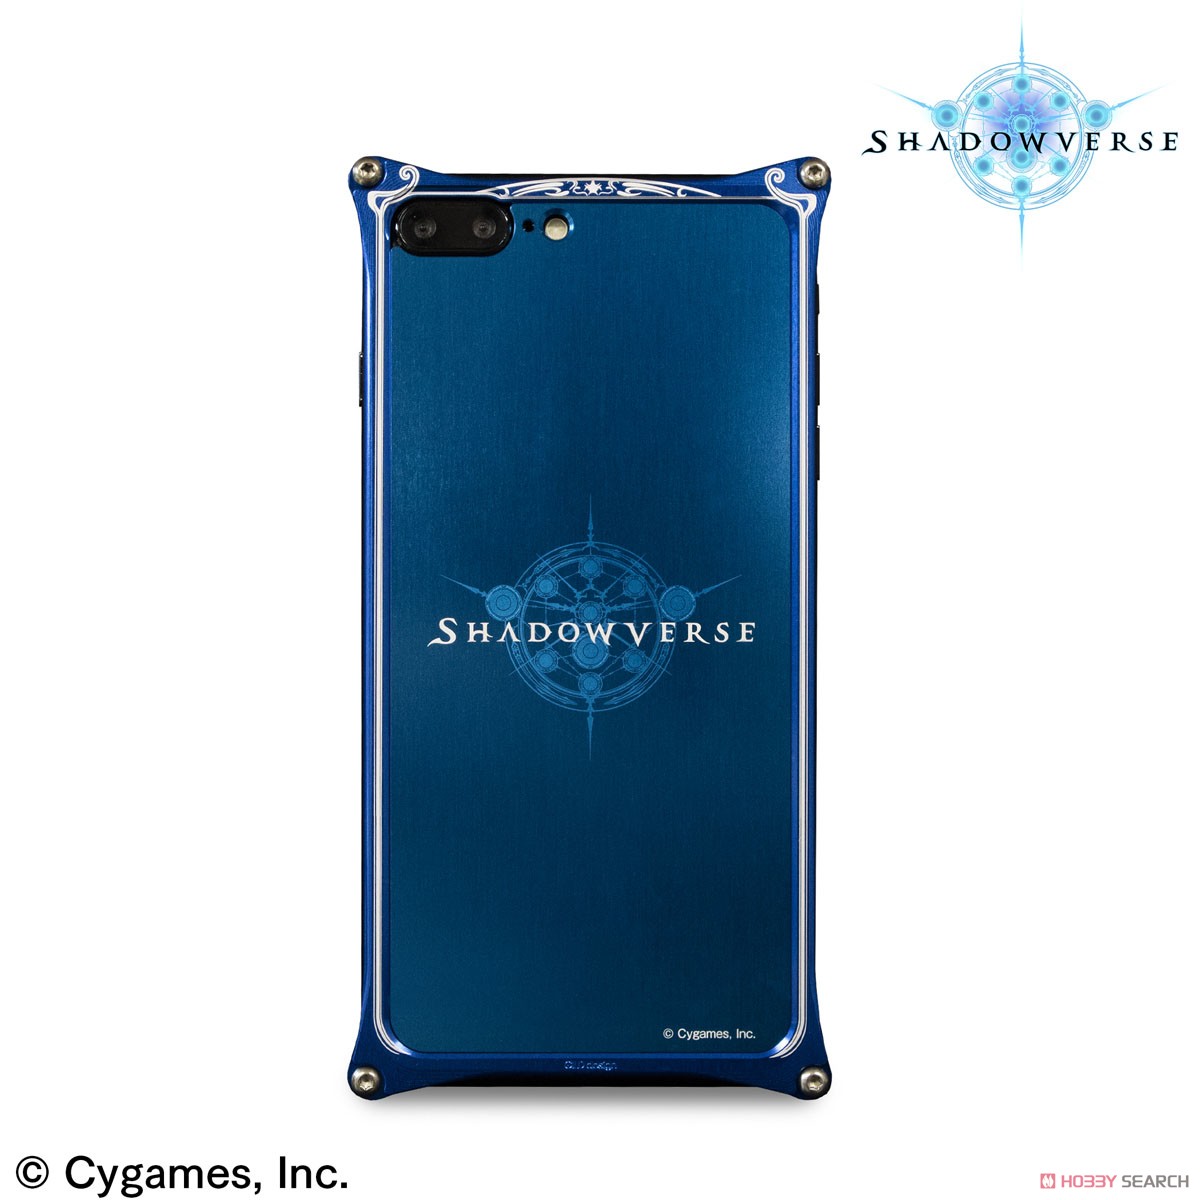 Shadowverse ソリッドバンパー Shadowverse for iPhone 8 Plus/7 Plus Blue (キャラクターグッズ) 商品画像1